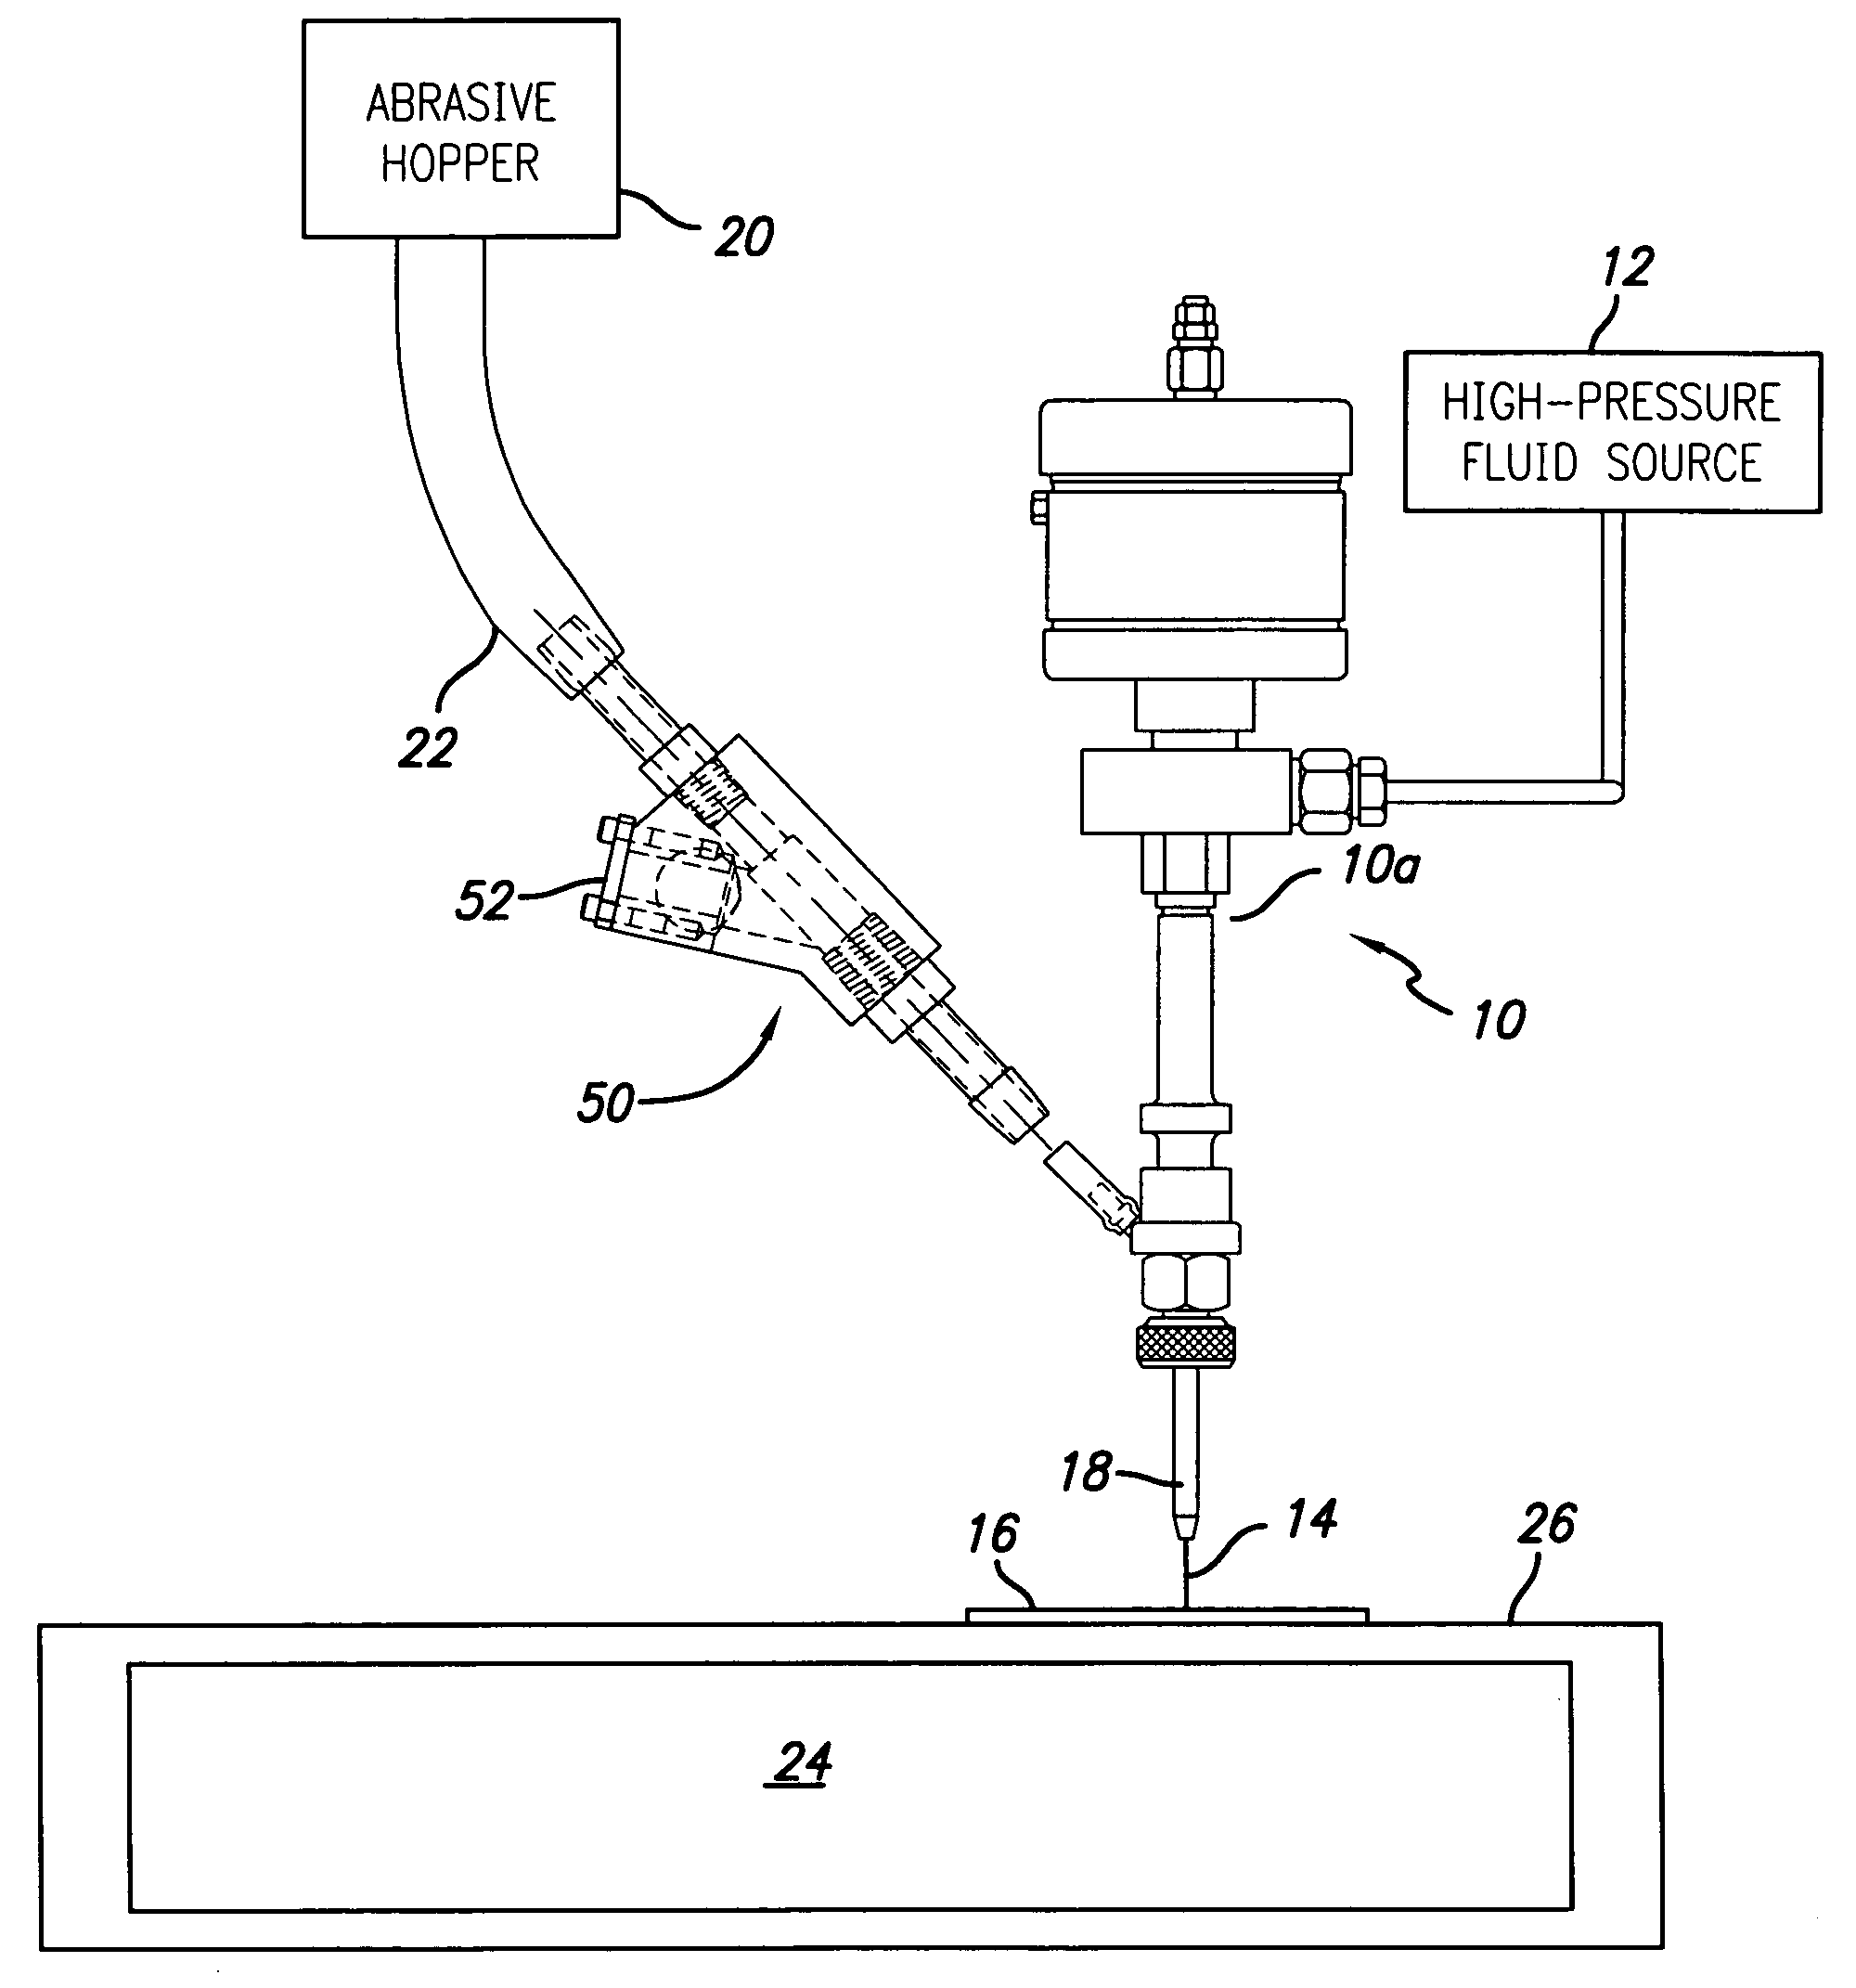 Abrasivejet cutting head with back-flow prevention valve